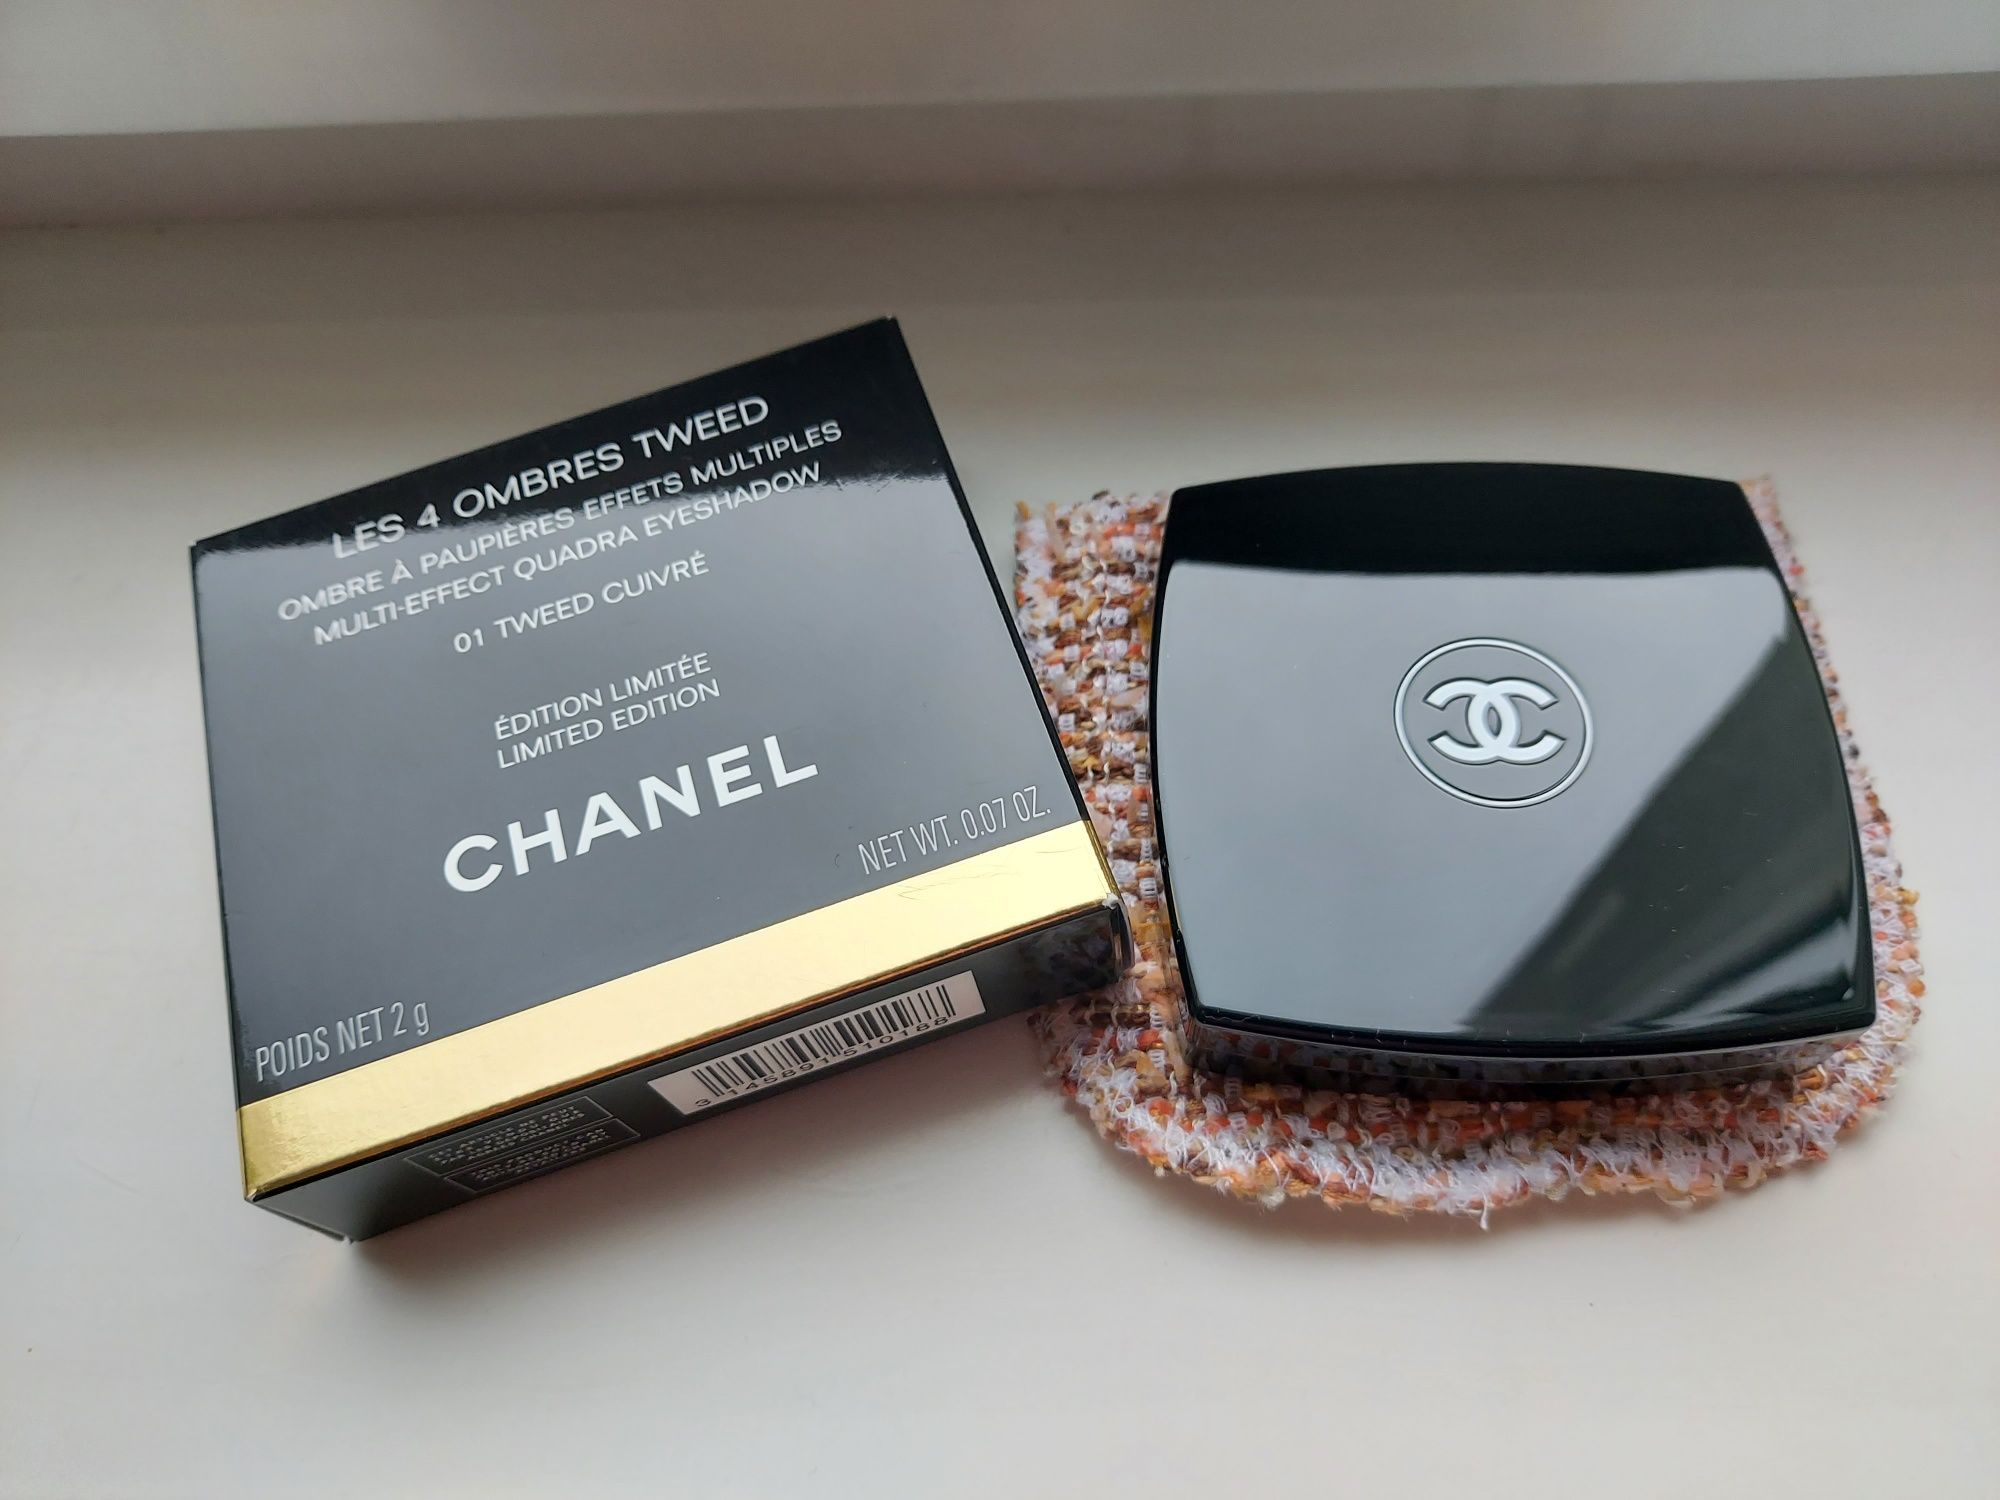 Cienie Chanel Les 4 Ombres 01 Tweed Cuivre Limited Edition paleta